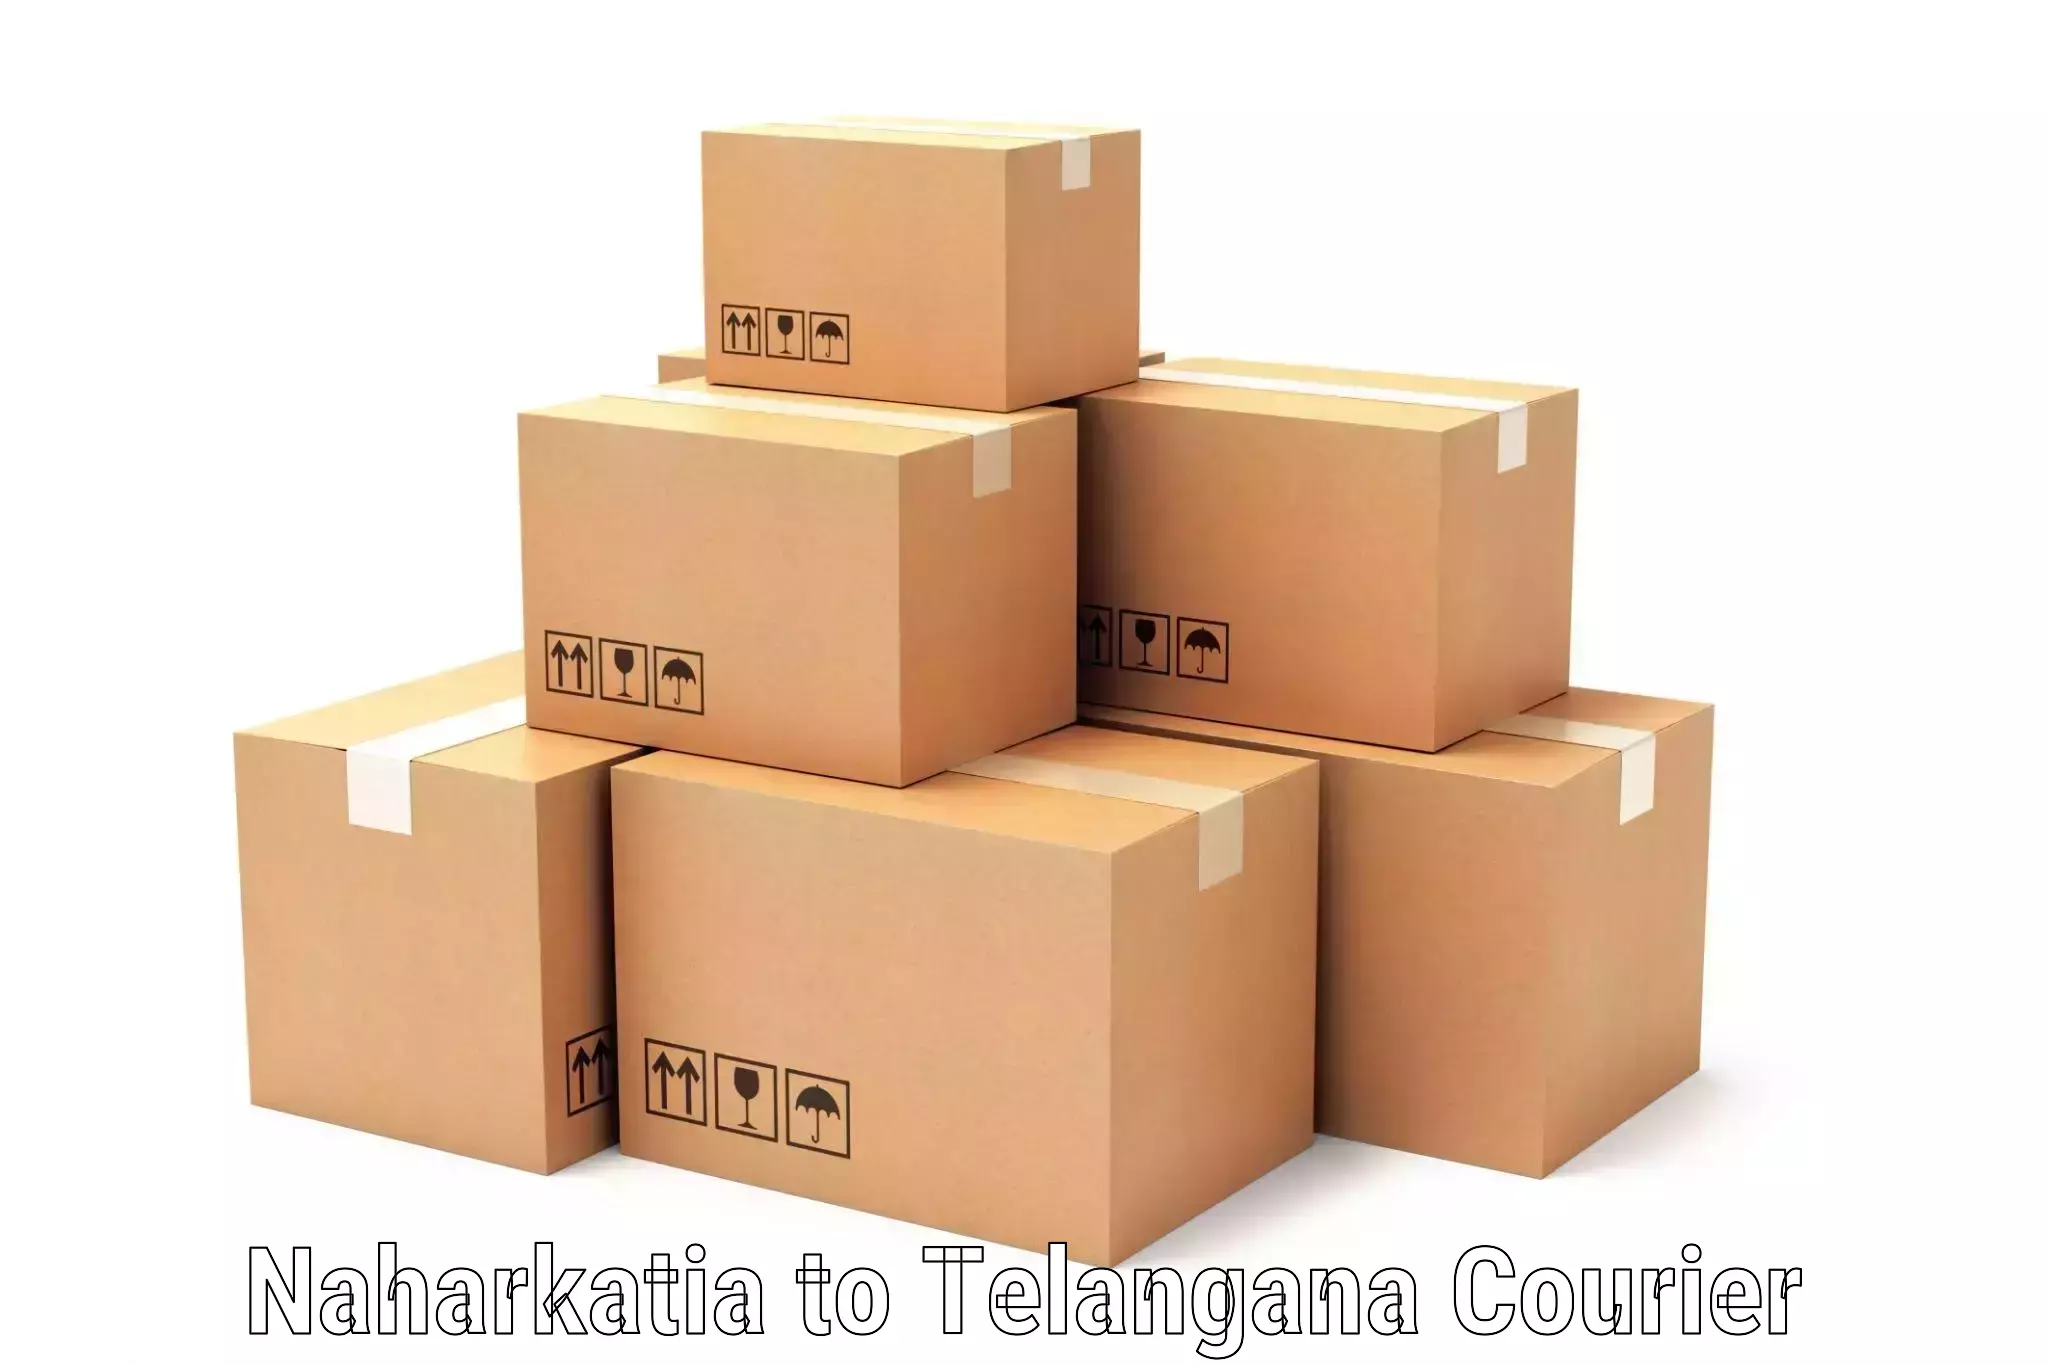 Special handling courier in Naharkatia to Kamalapur